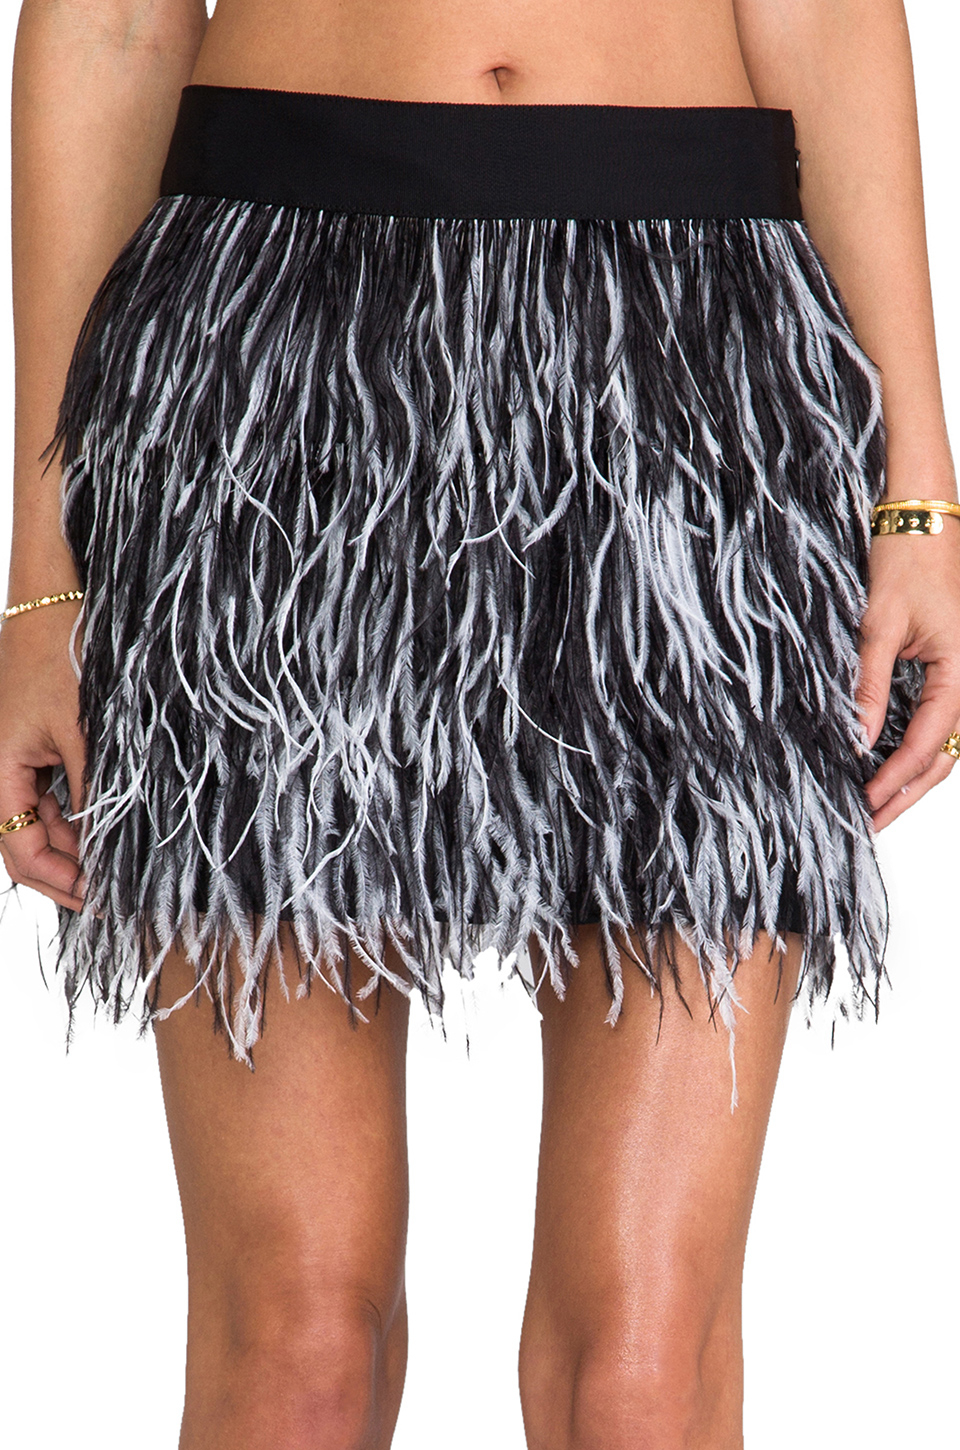 Lyst - Milly Cocktail Ostrich Fringe Skirt in Black in Gray